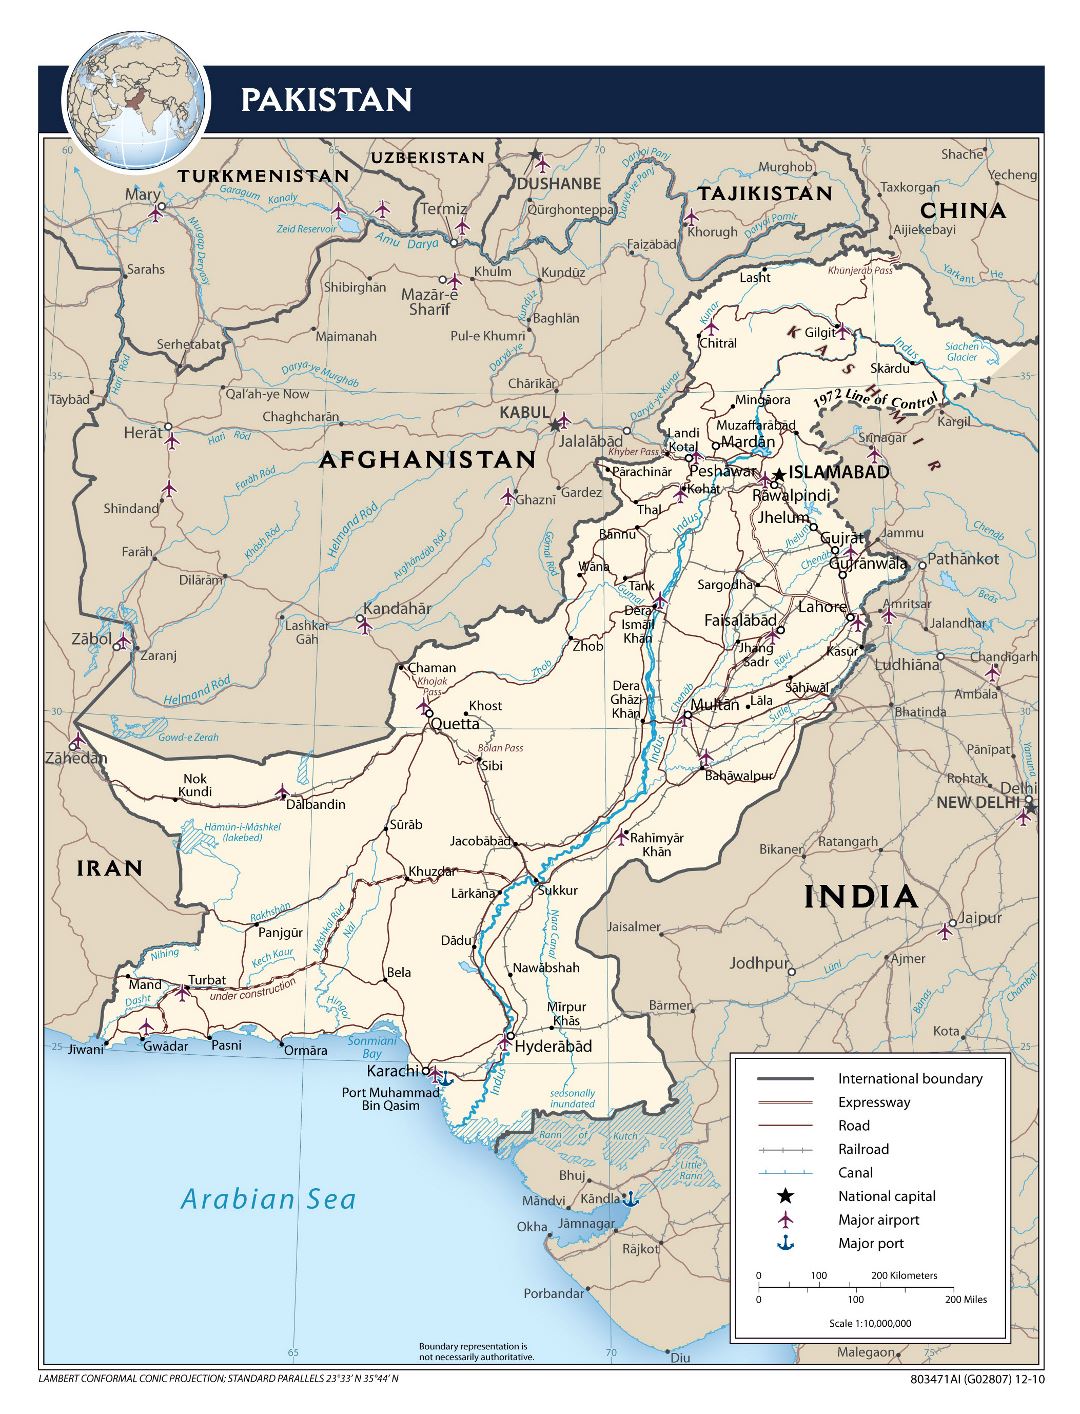 Large political map of Pakistan with roads, railroads, cities, airports, ports and other marks - 2010